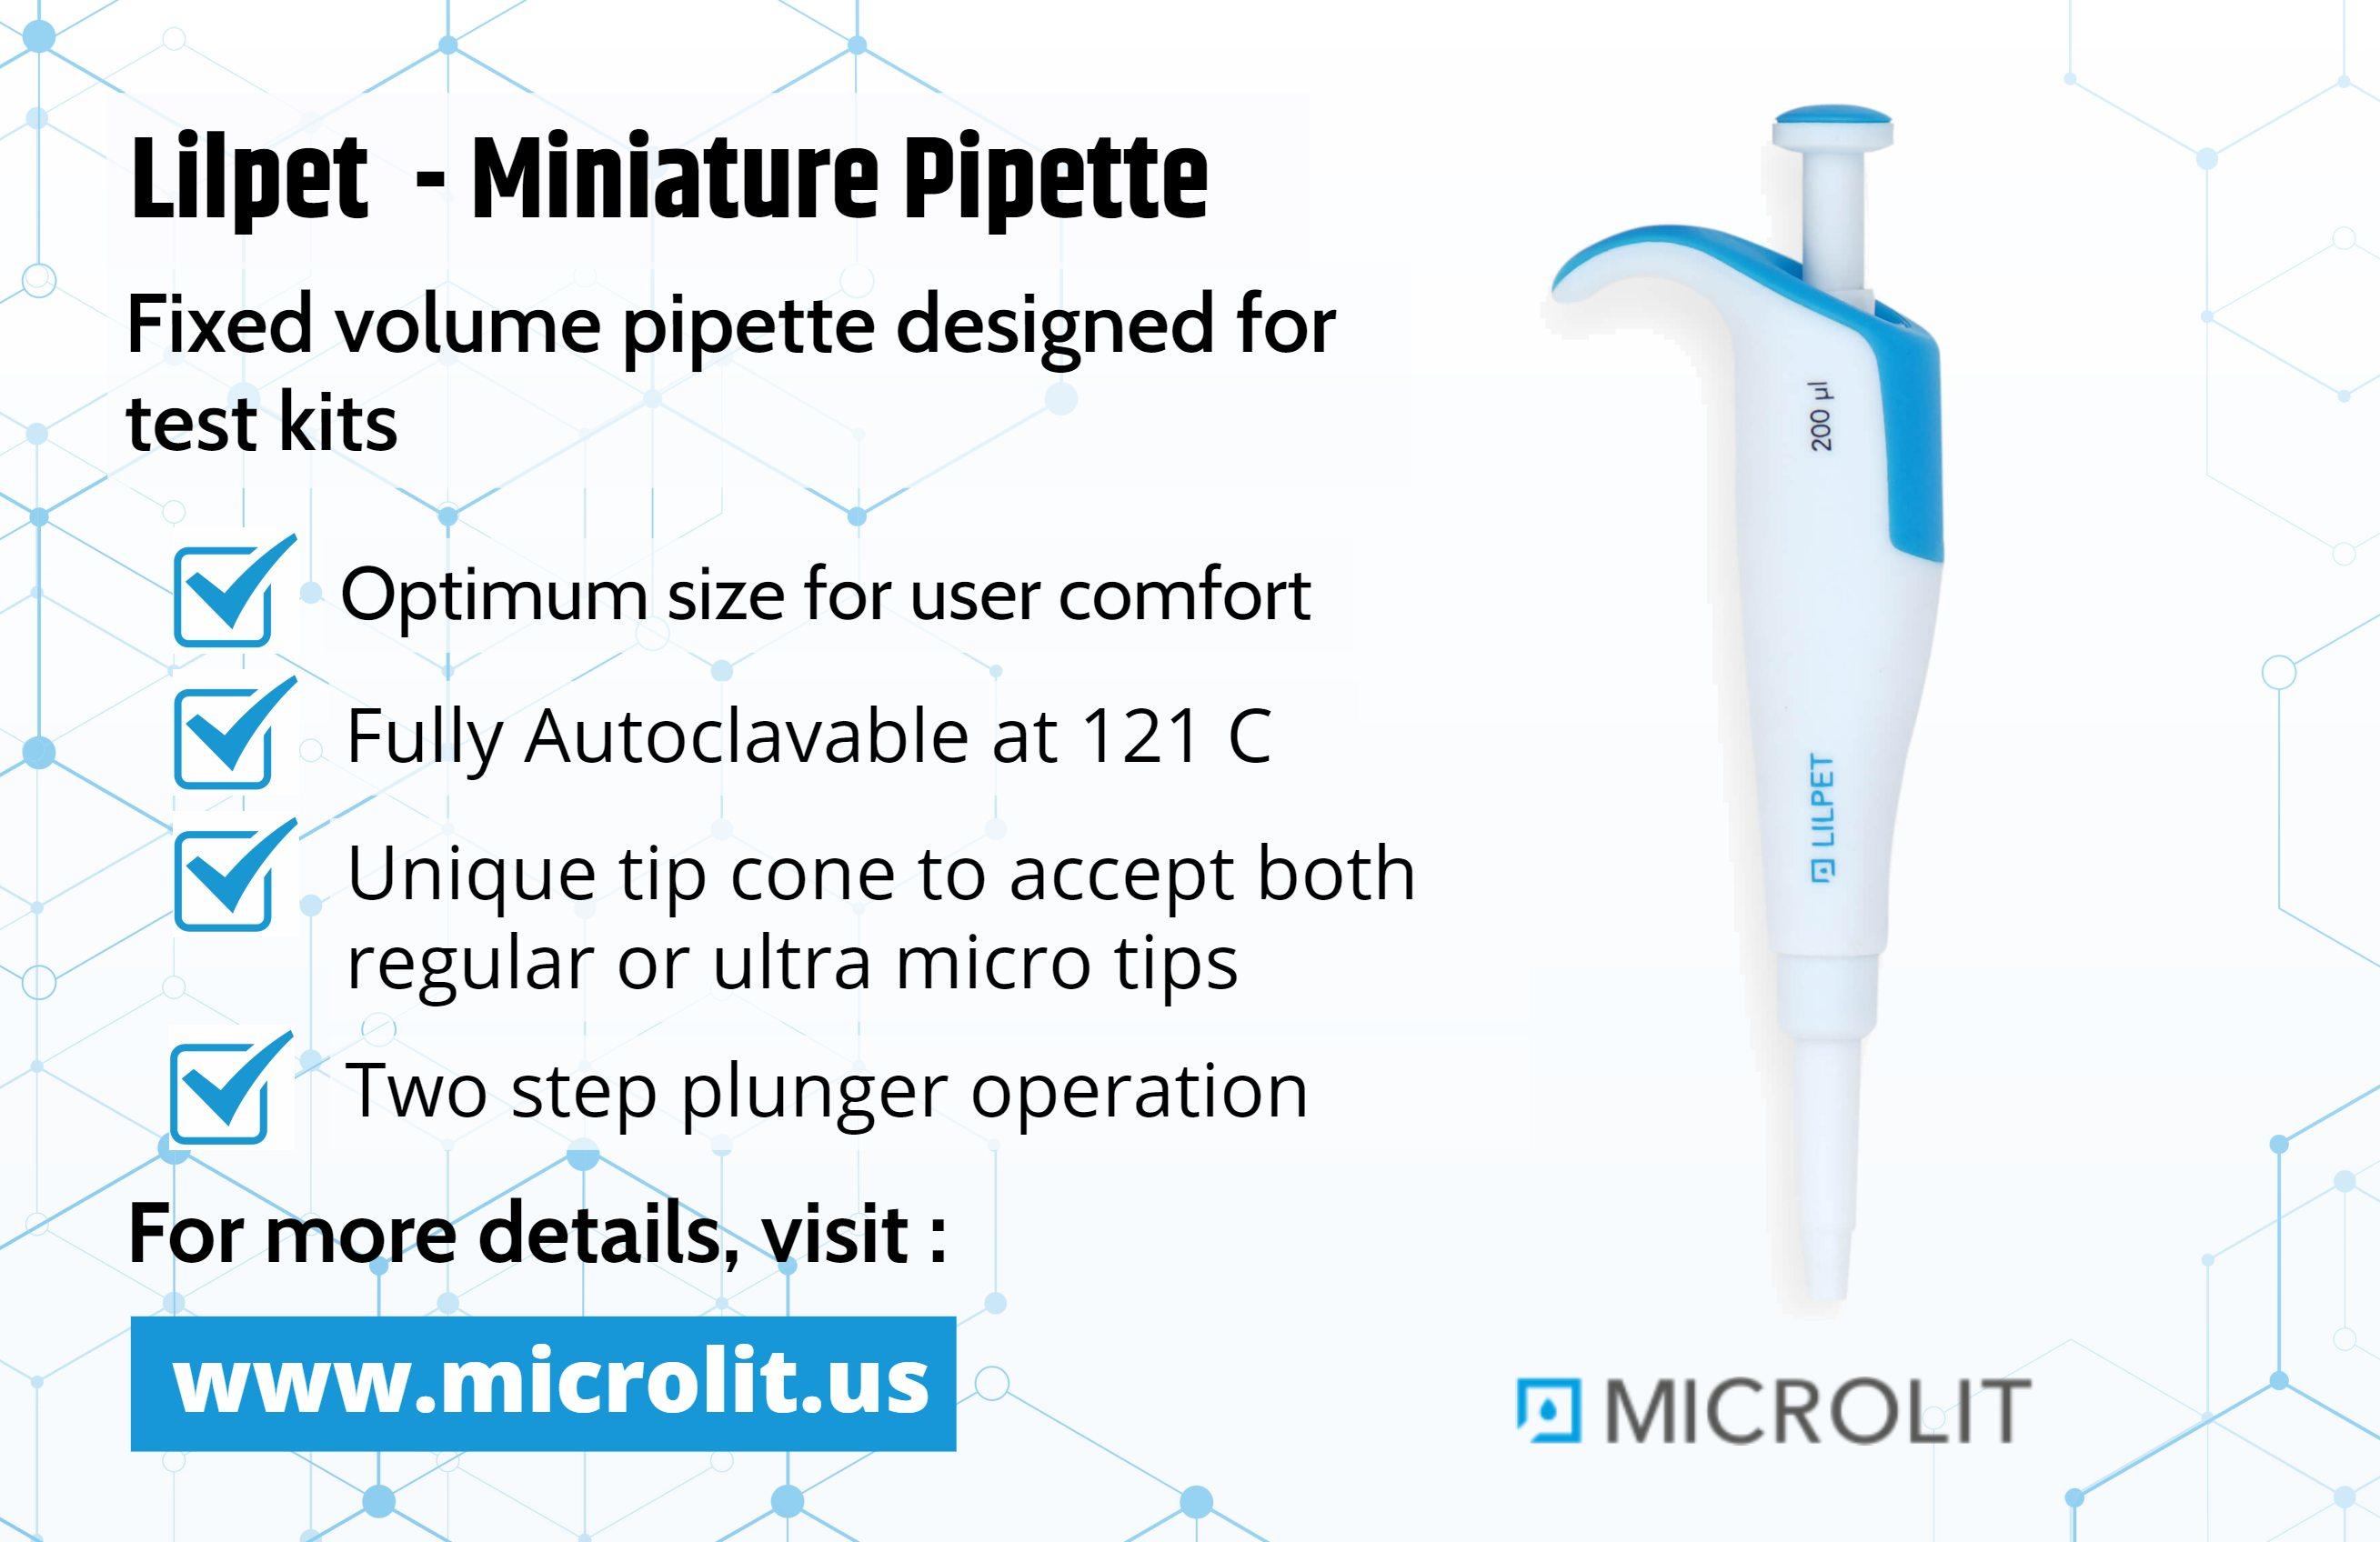 Image - Microlit offers the best quality fixed volume #MiniaturePipette designed for test kits. This #Pipette have op...